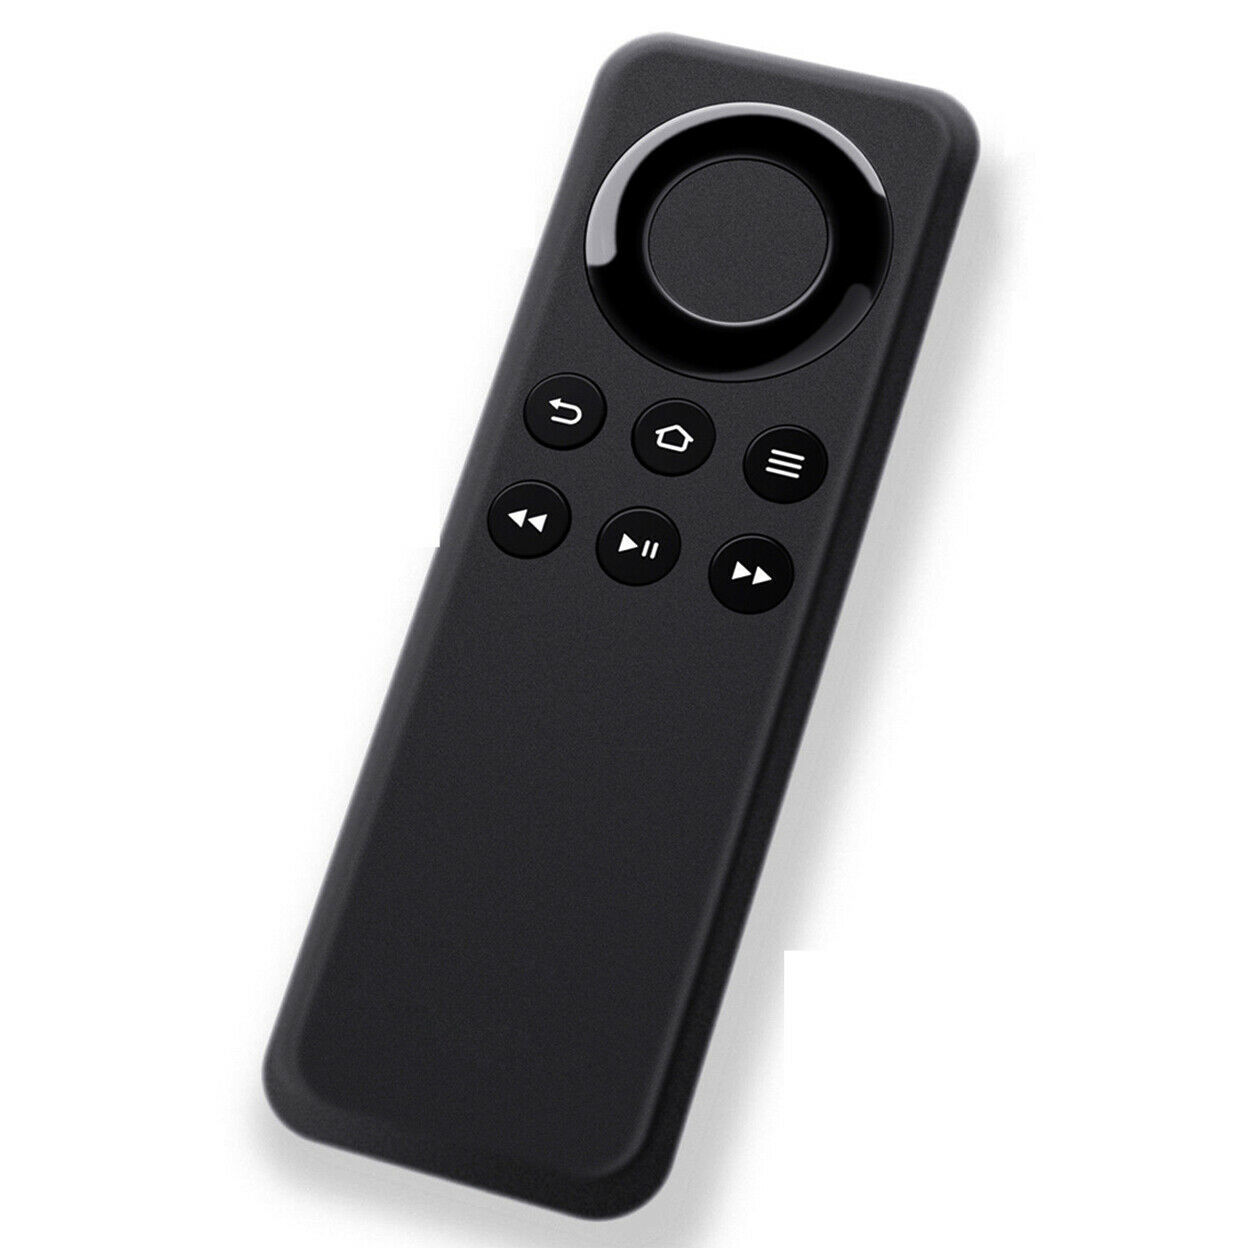 Primary image for New Cv98Lm Bluetooth Remote Control For Amazon Tv Stick Clicker Player Box